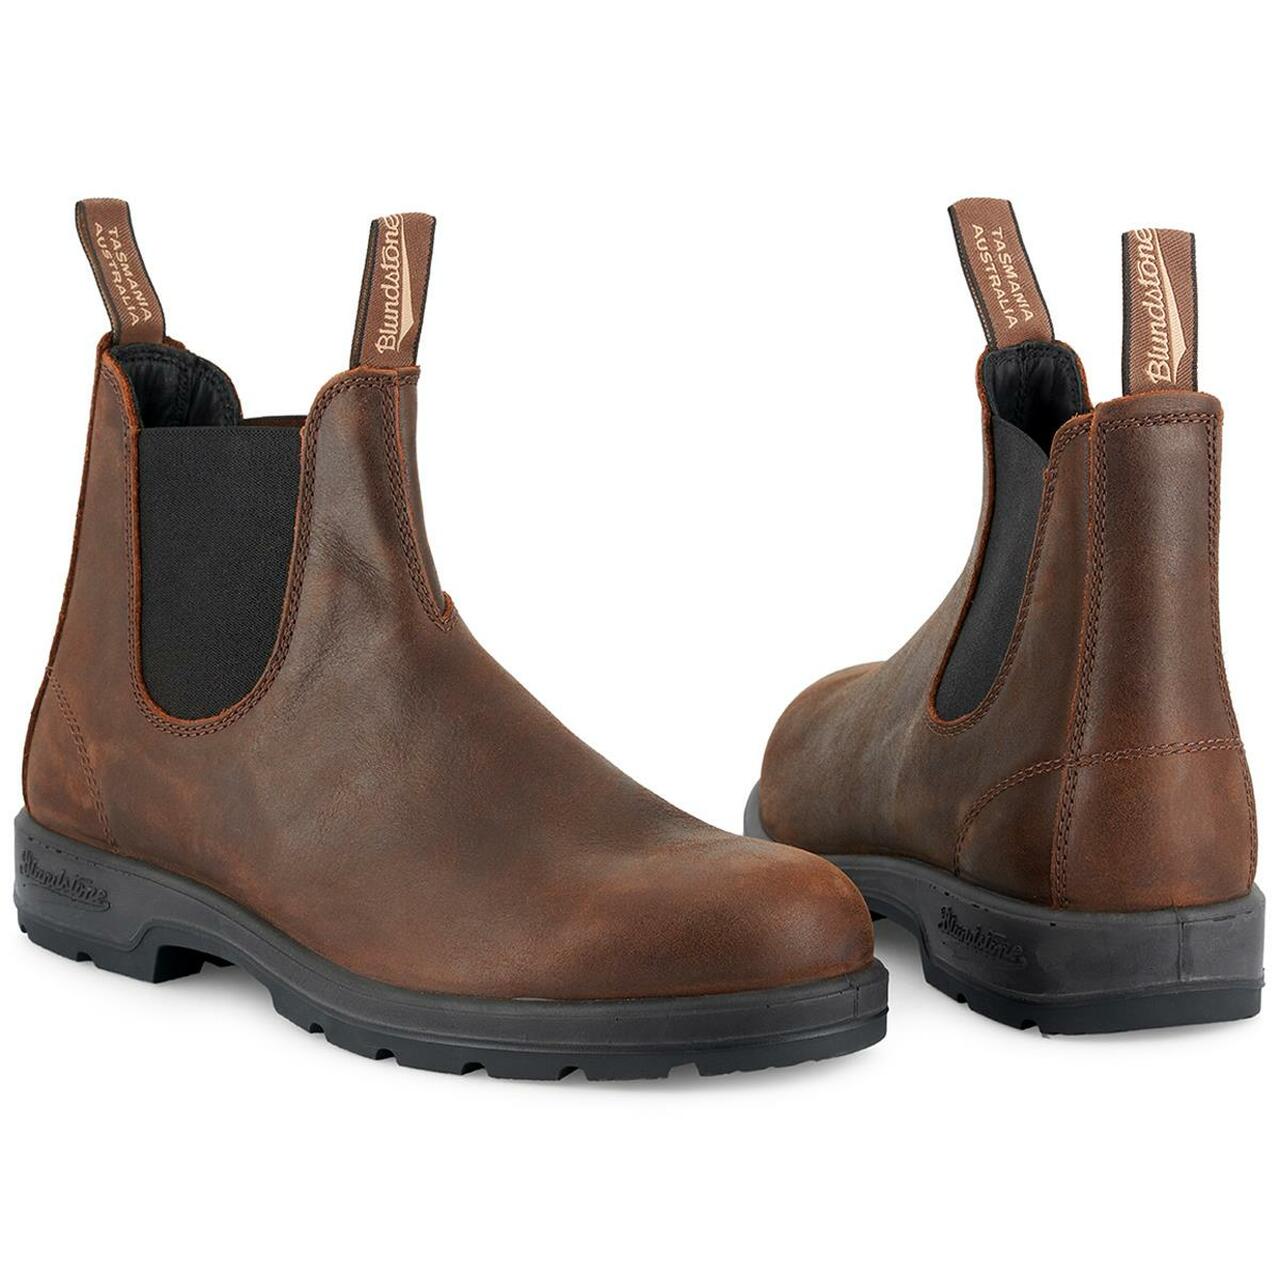 Blundstone 1609 Classic Chelsea Boots - Antique Brown